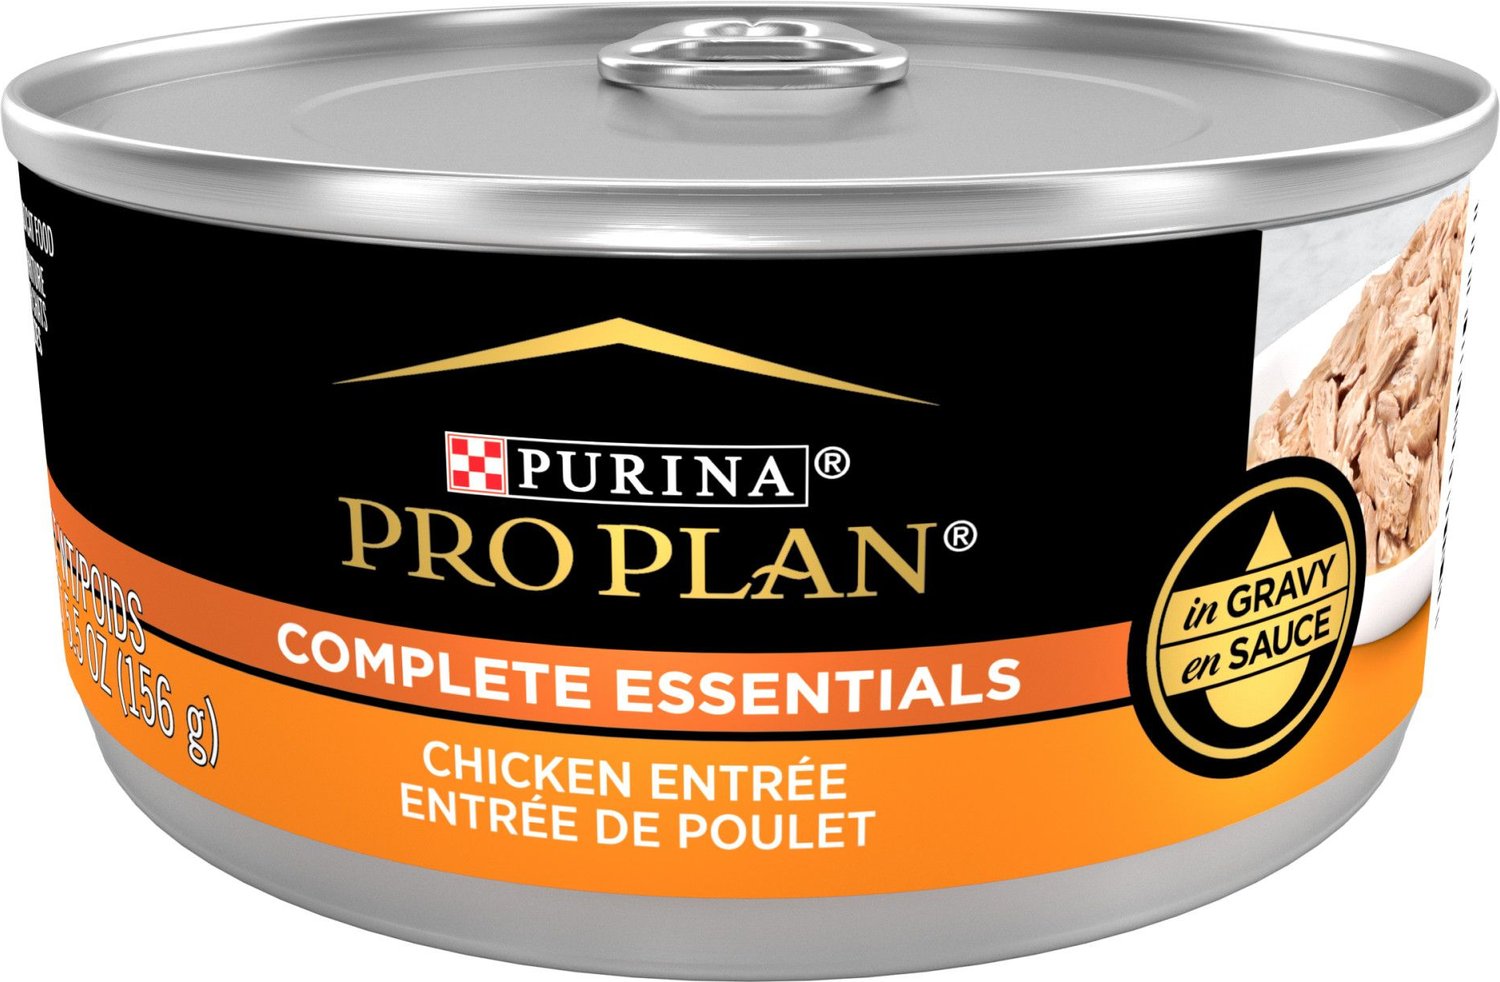 Purina Pro Plan Adult Chicken Entree in Gravy Canned Cat Food, 5.5oz